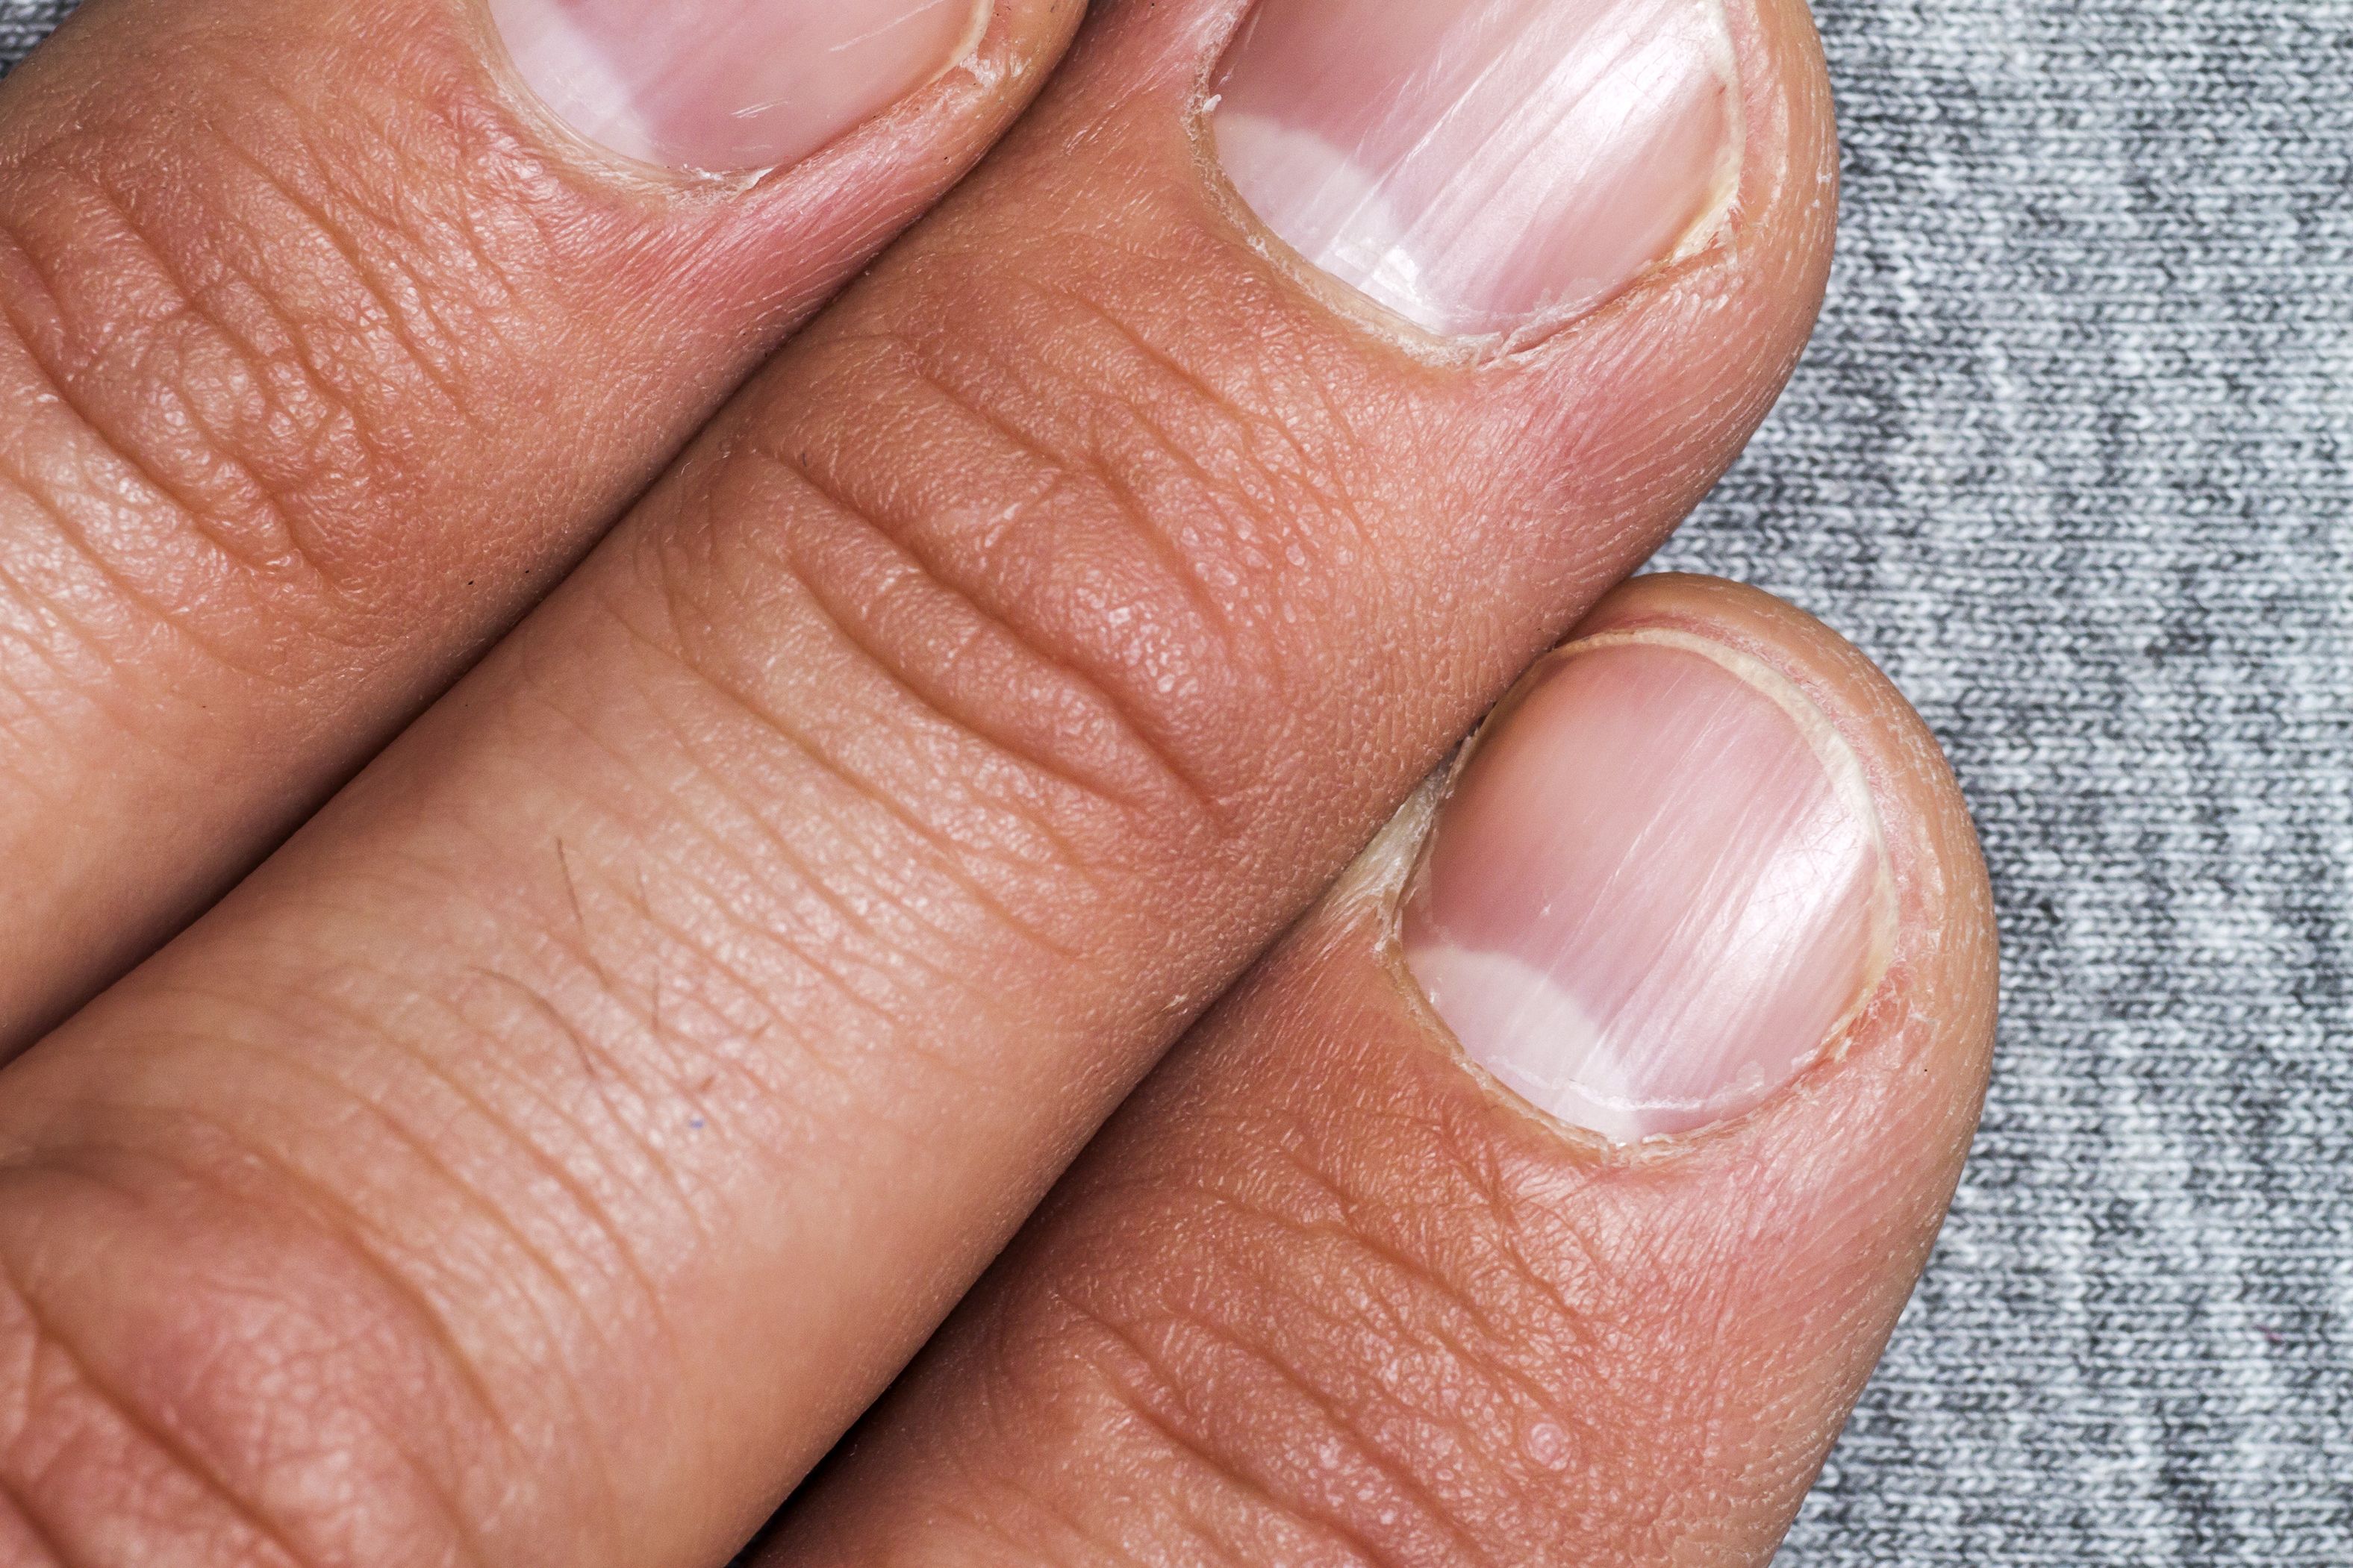 7 Ways to Stop Biting Your Nails